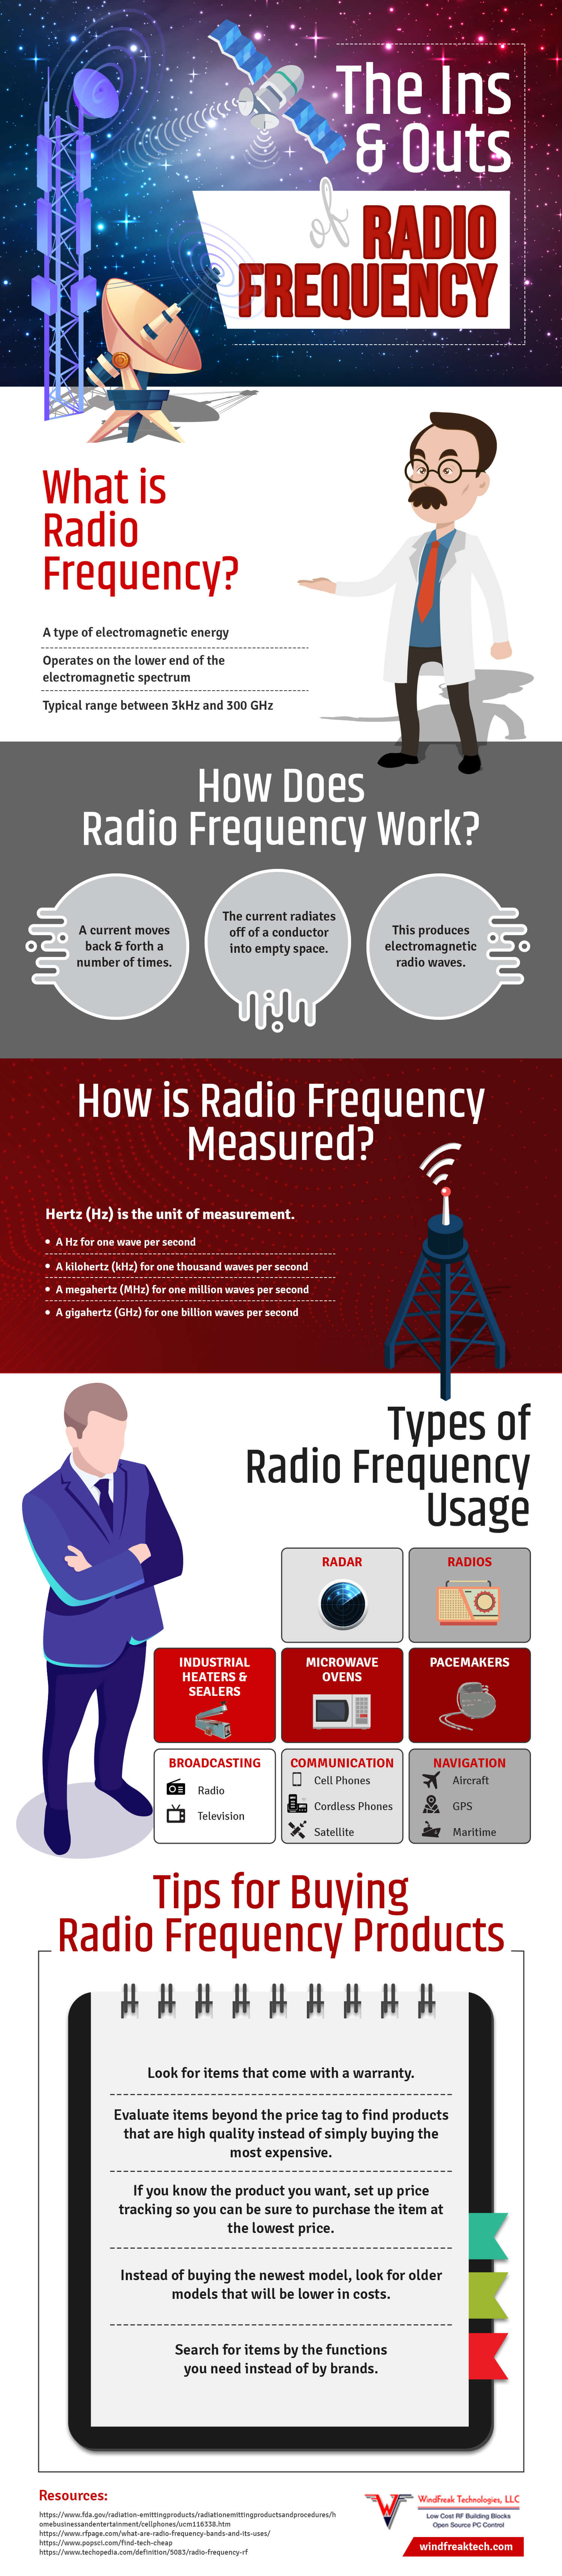 The Ins and Outs of Radio Frequency